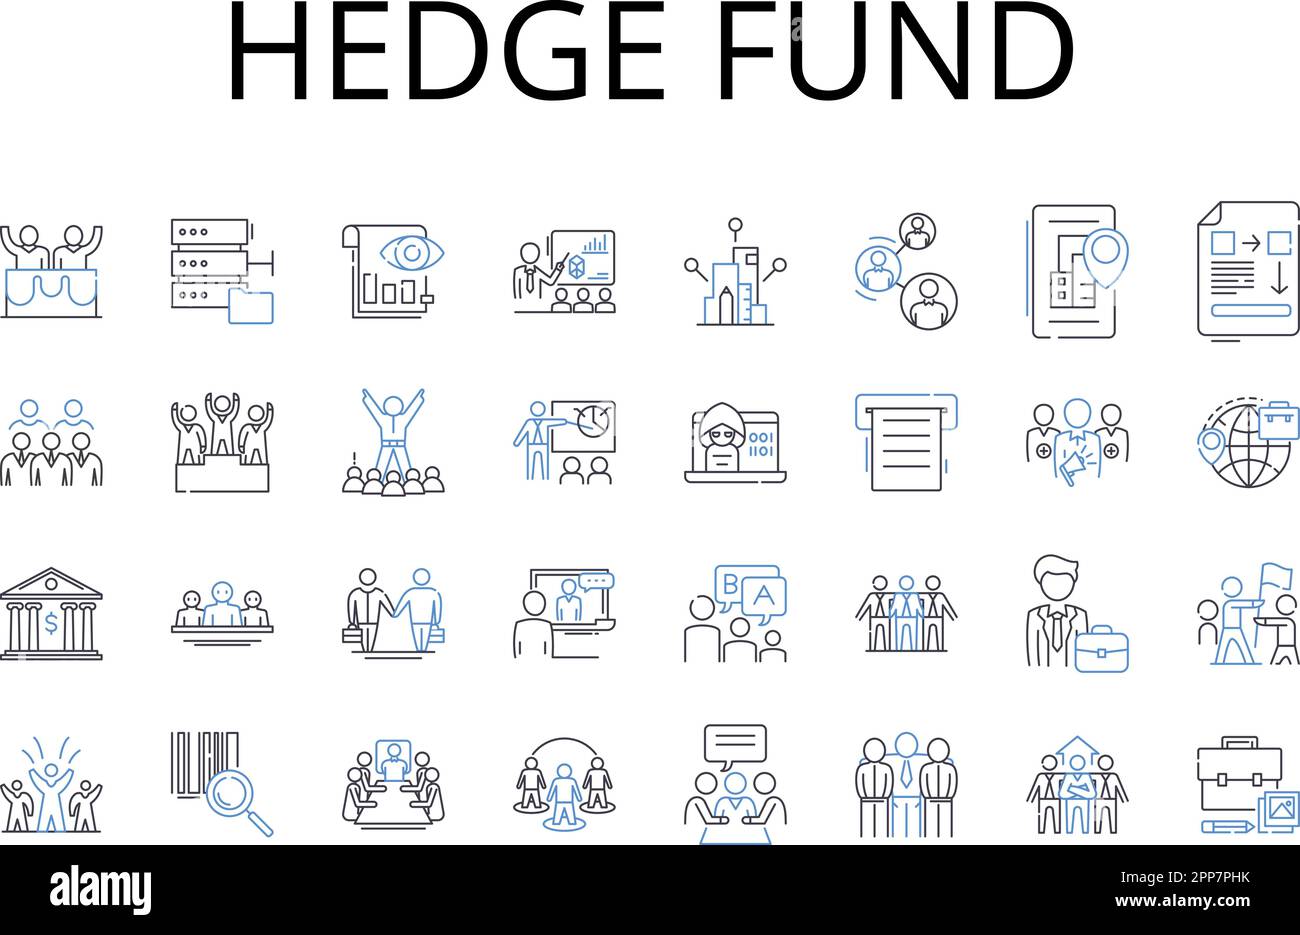 Hedge fund line icons collection. Wealth management, Investment vehicle, Venture capital, Angel investing, Mutual fund, Private equity, Asset Stock Vector